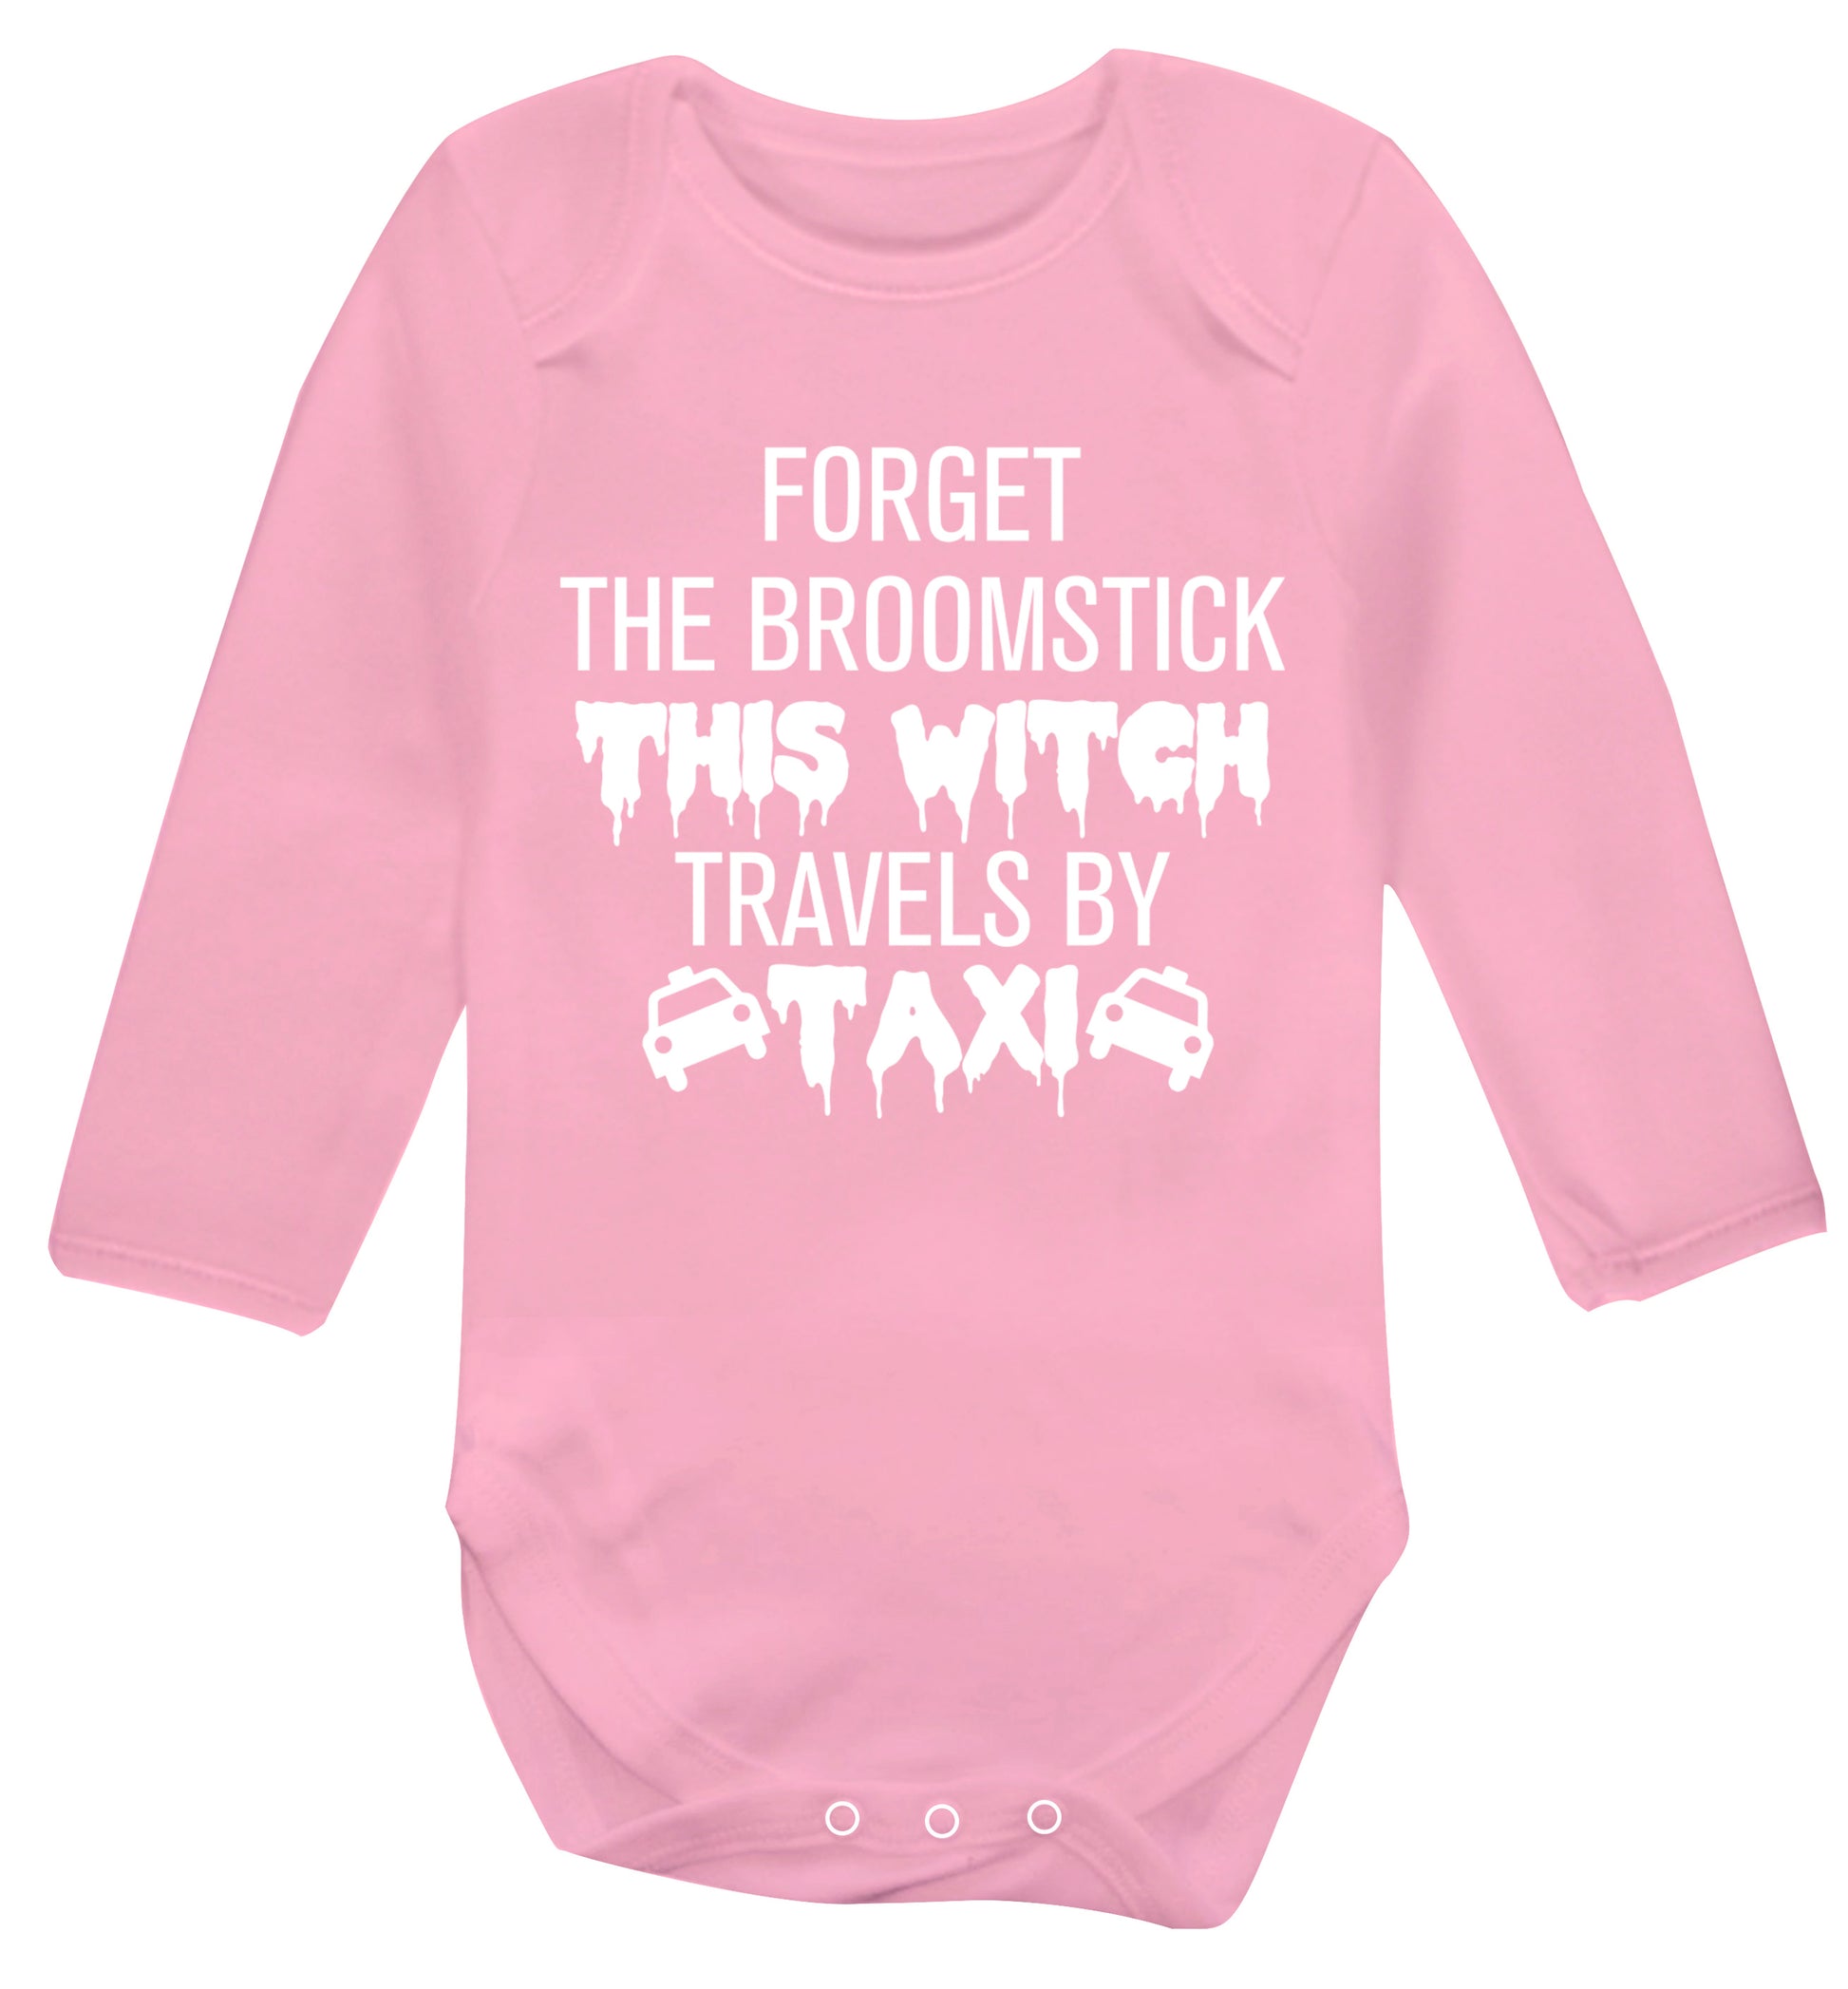 Forget the broomstick this witch travels by taxi Baby Vest long sleeved pale pink 6-12 months